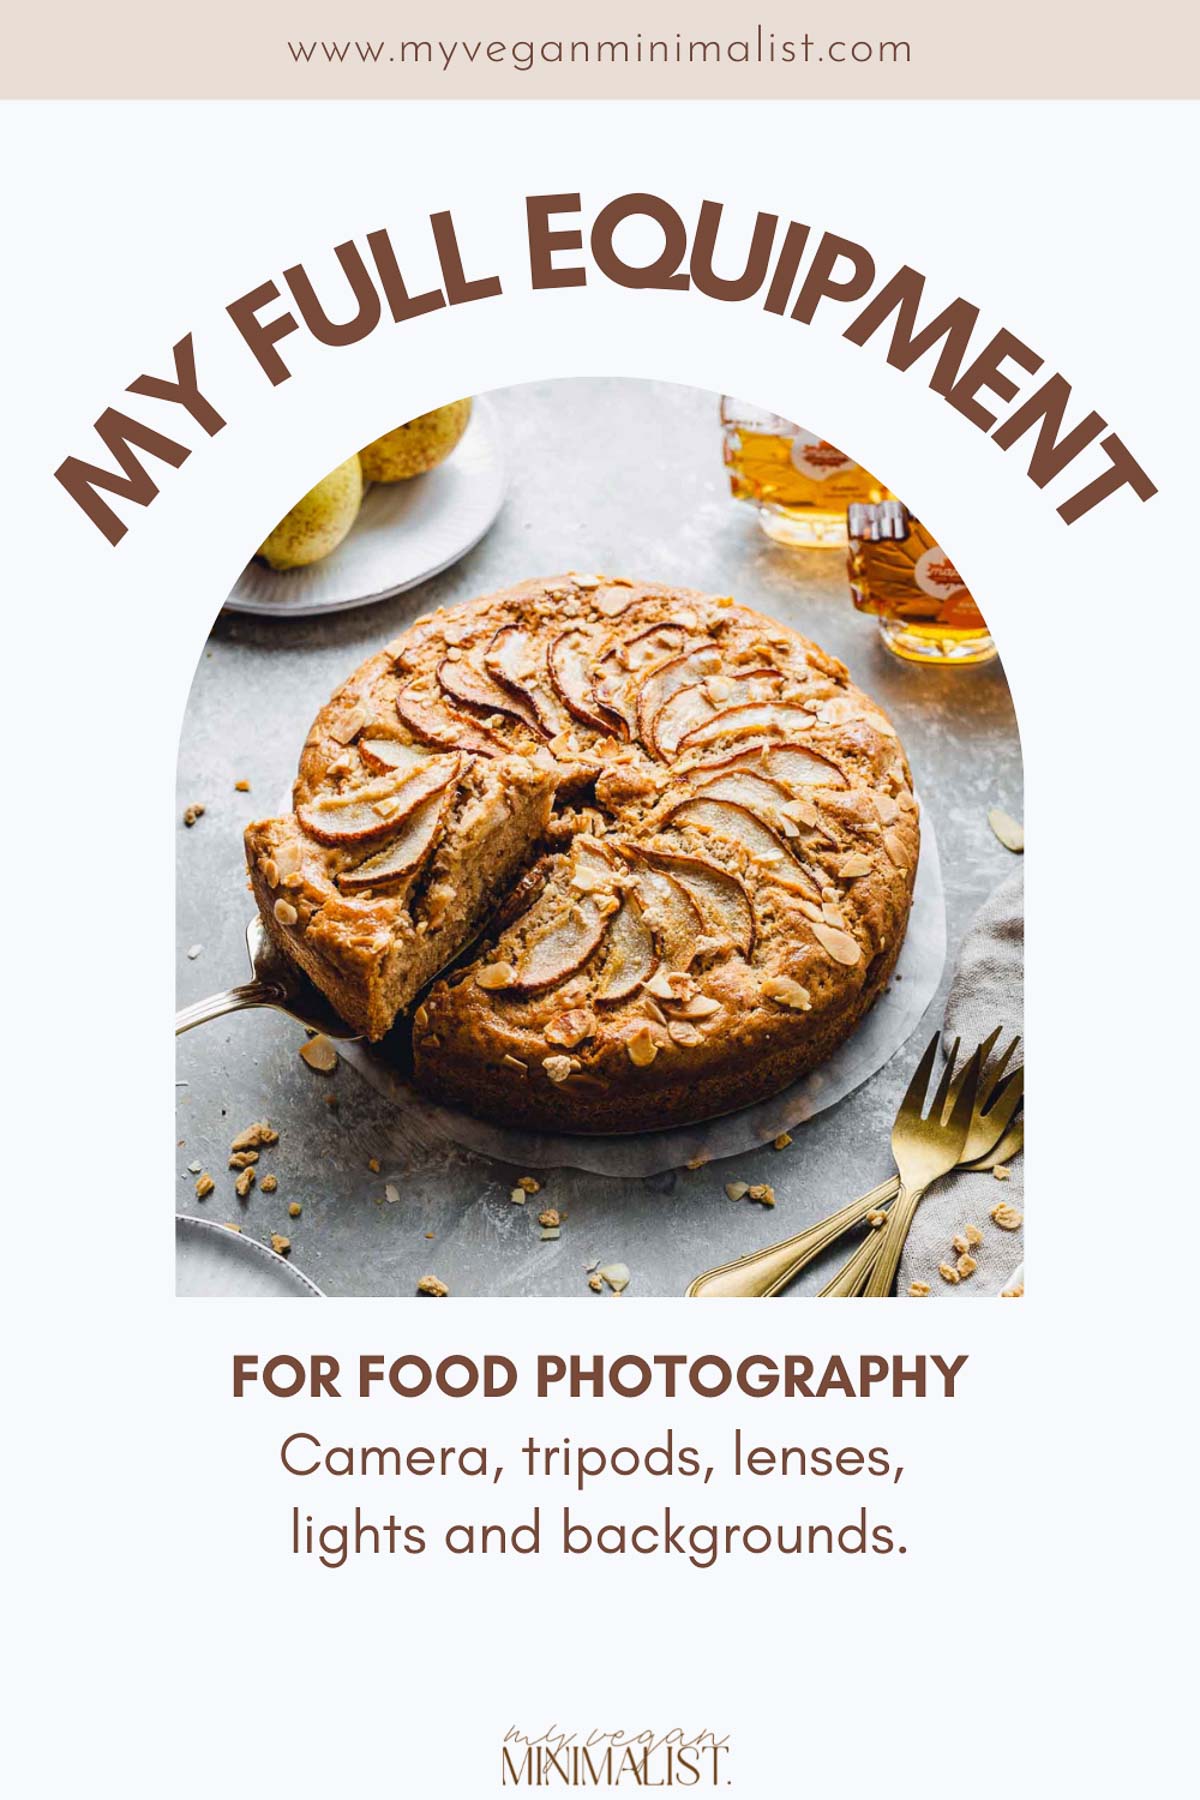 A graphic containing a photo of a cake in the middle with a text 'My Full Equipment' around it. 